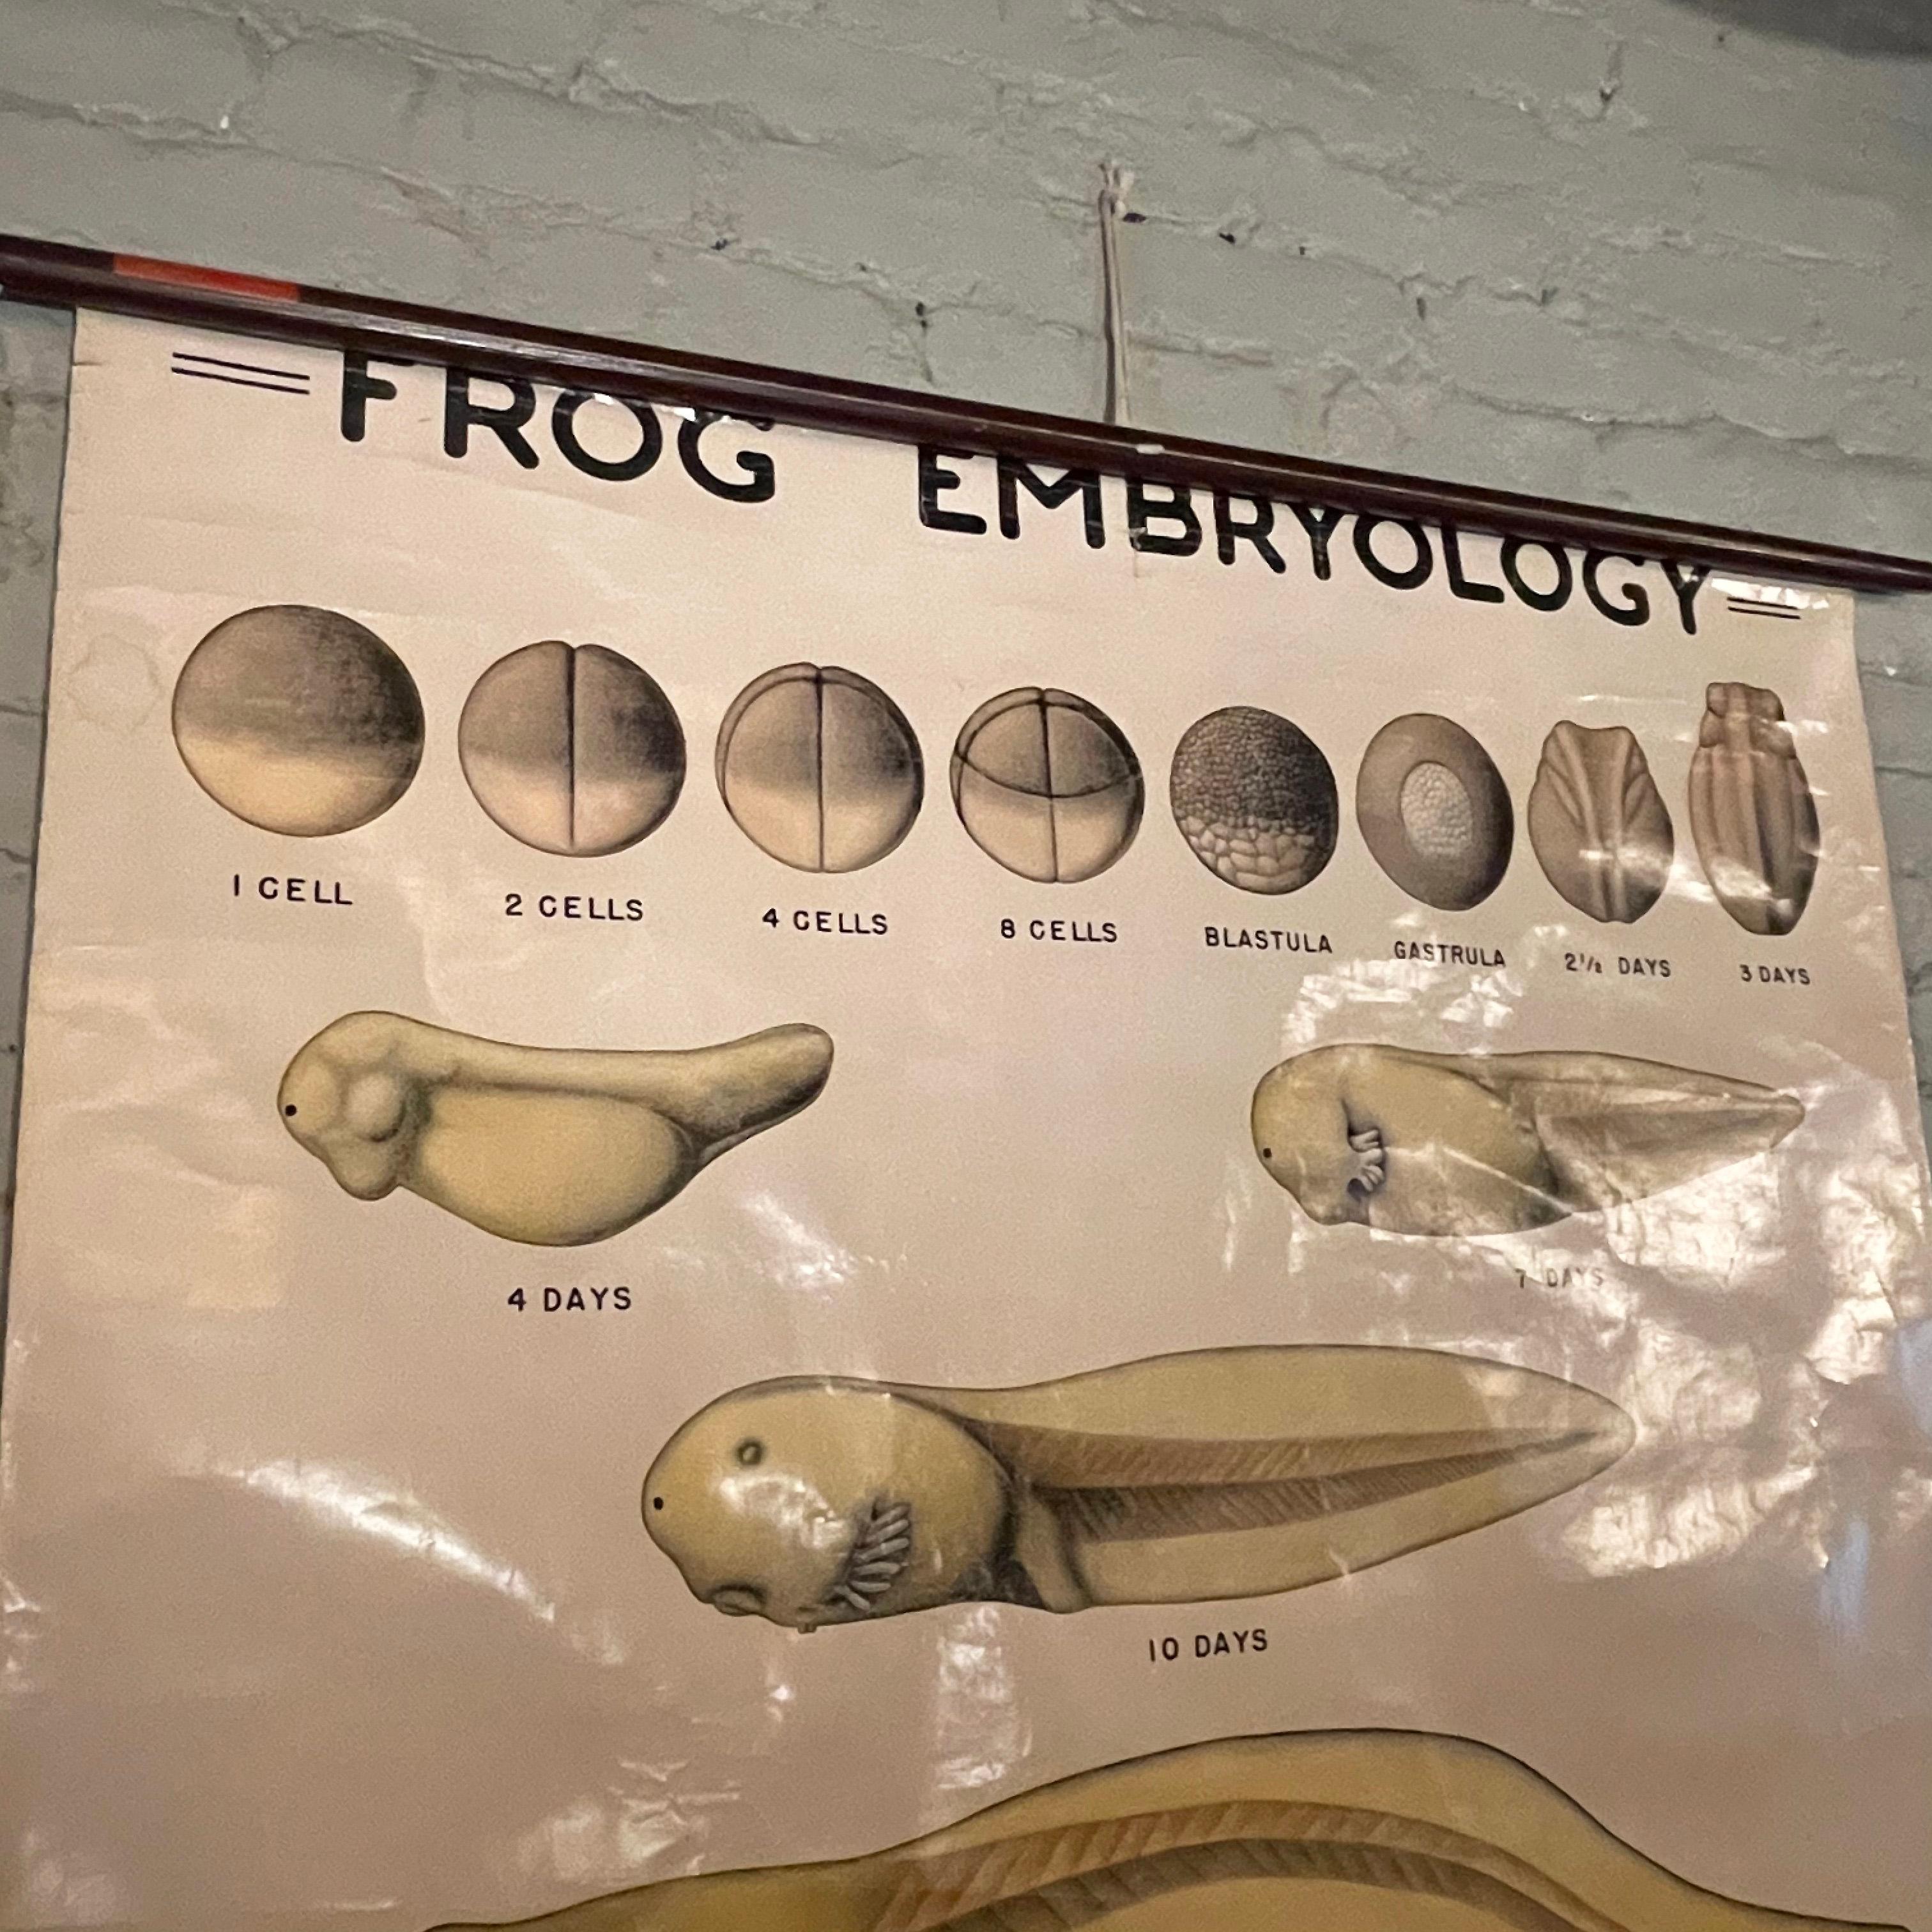 Educational Frog Embryology Chart by The Welch Scientific Company 1